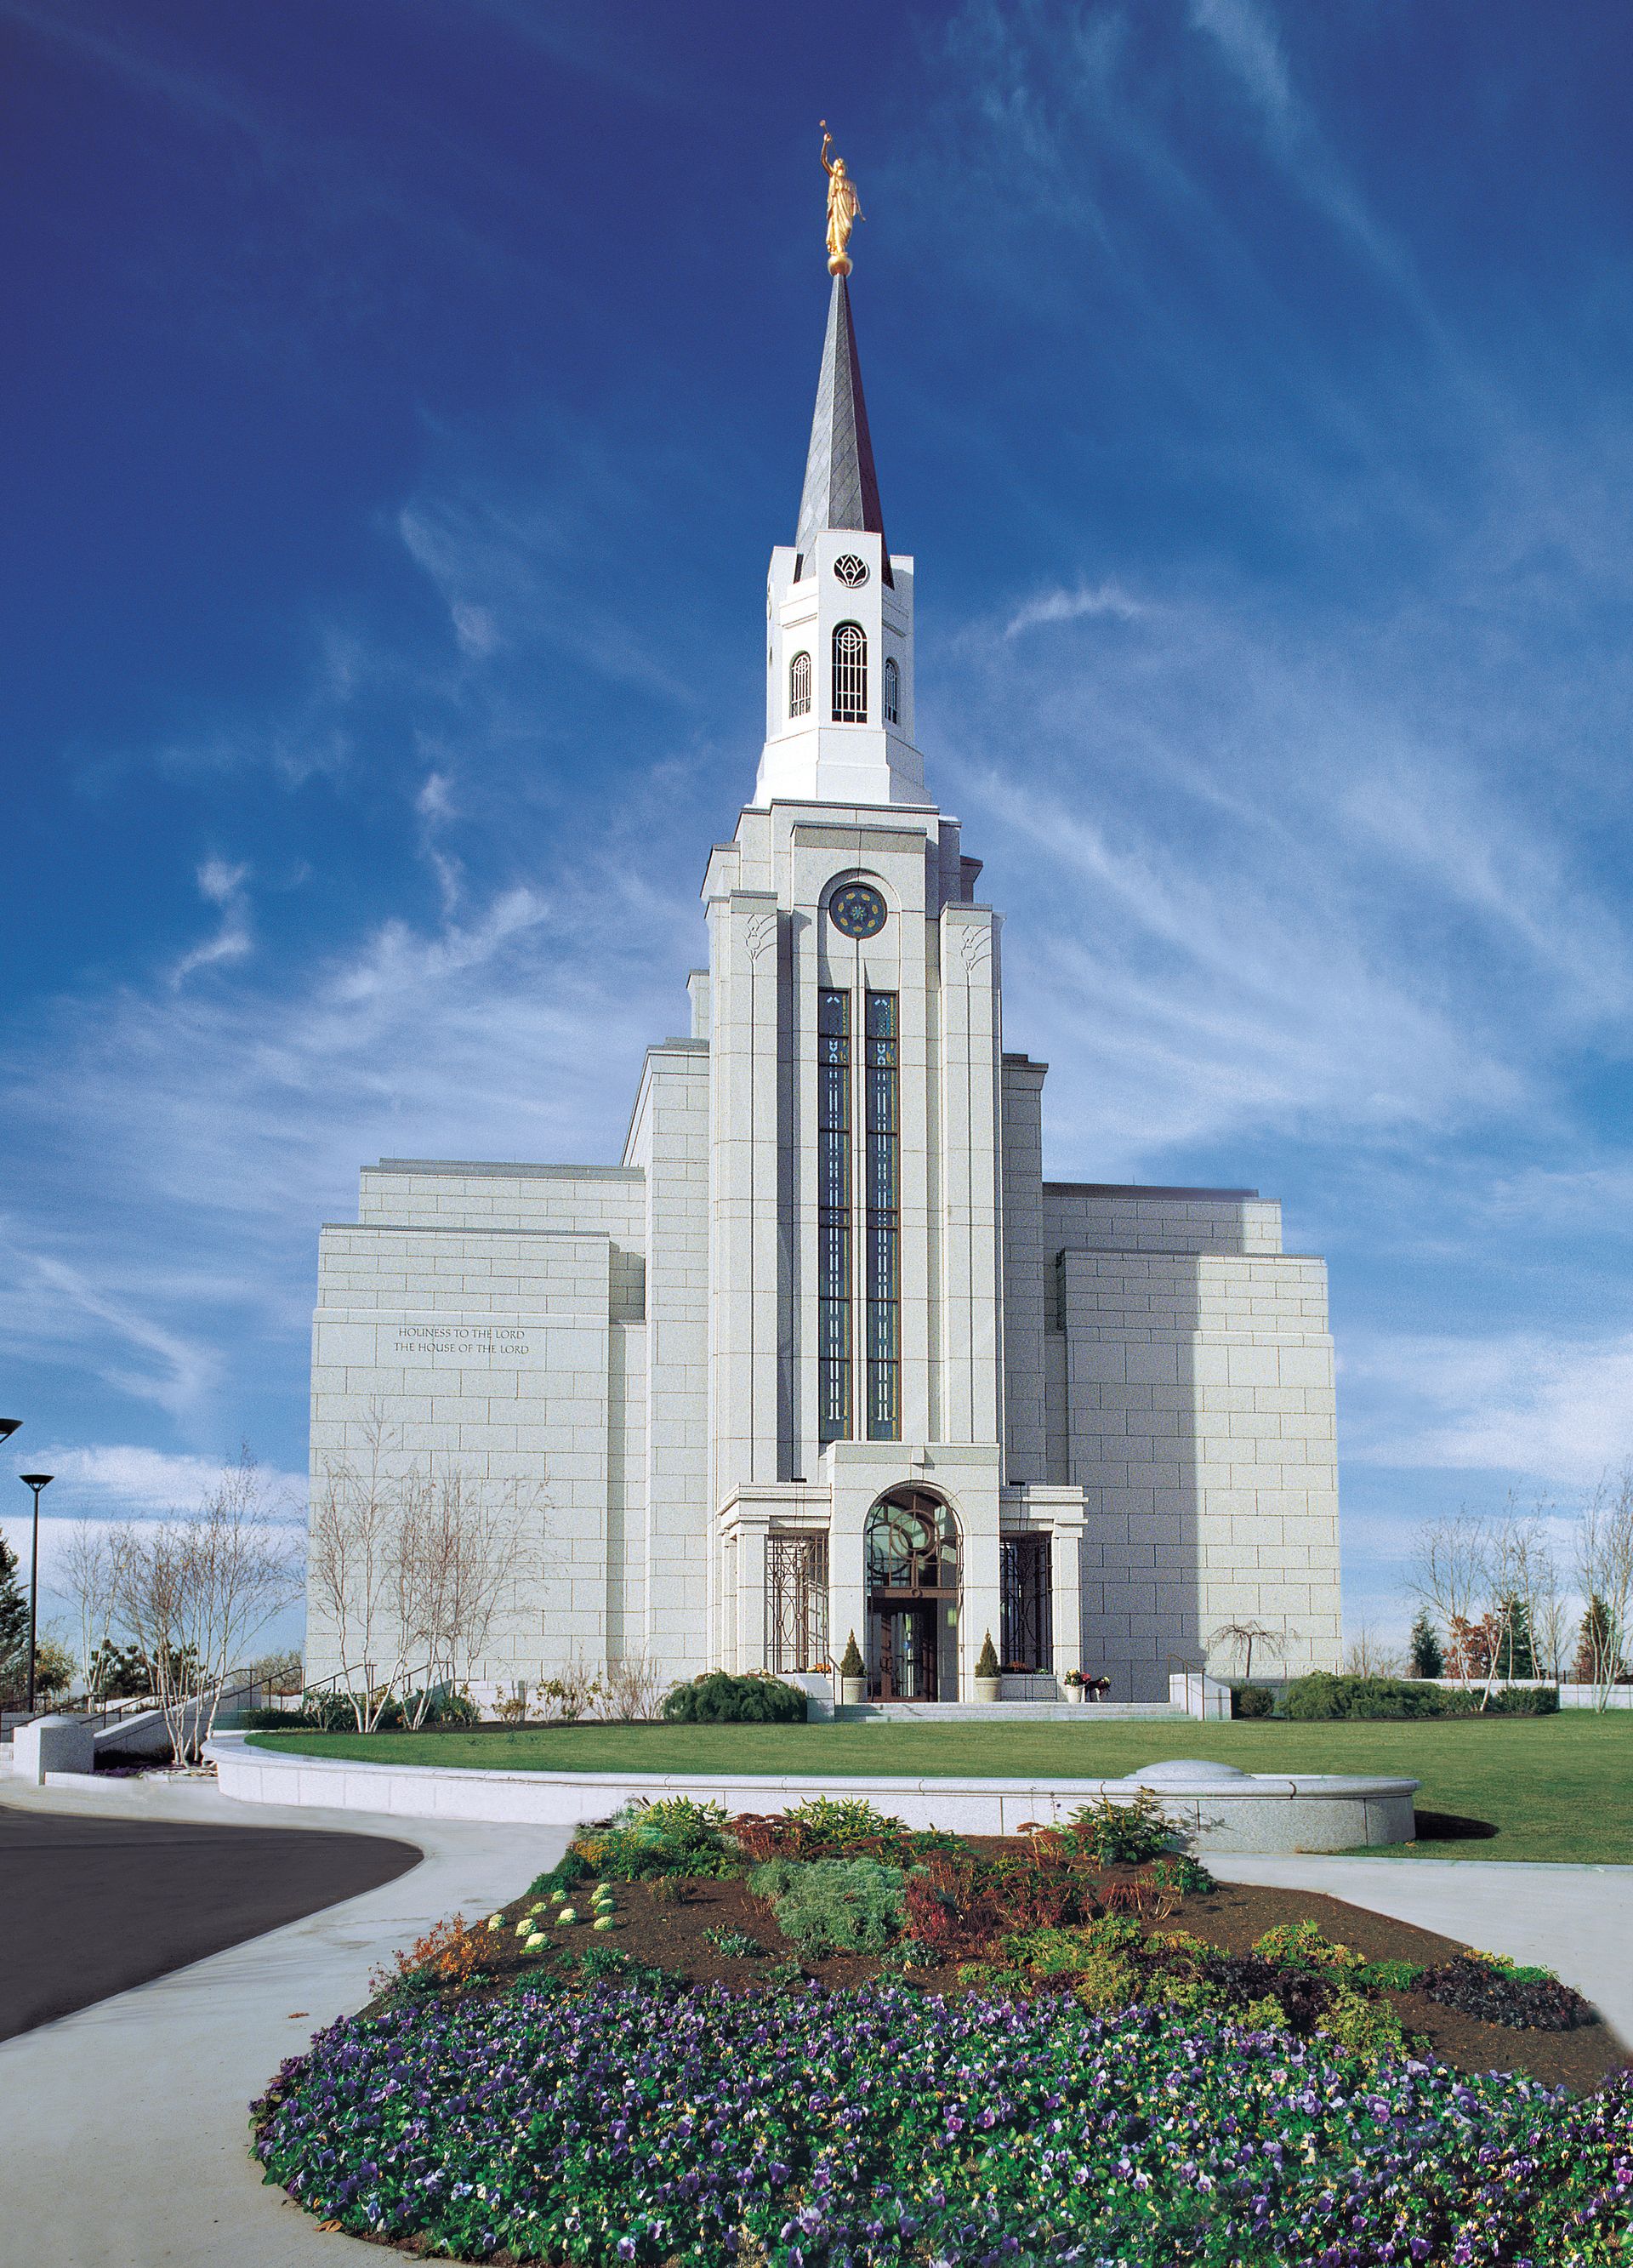 A front exterior view of the Boston Massachusetts Temple.